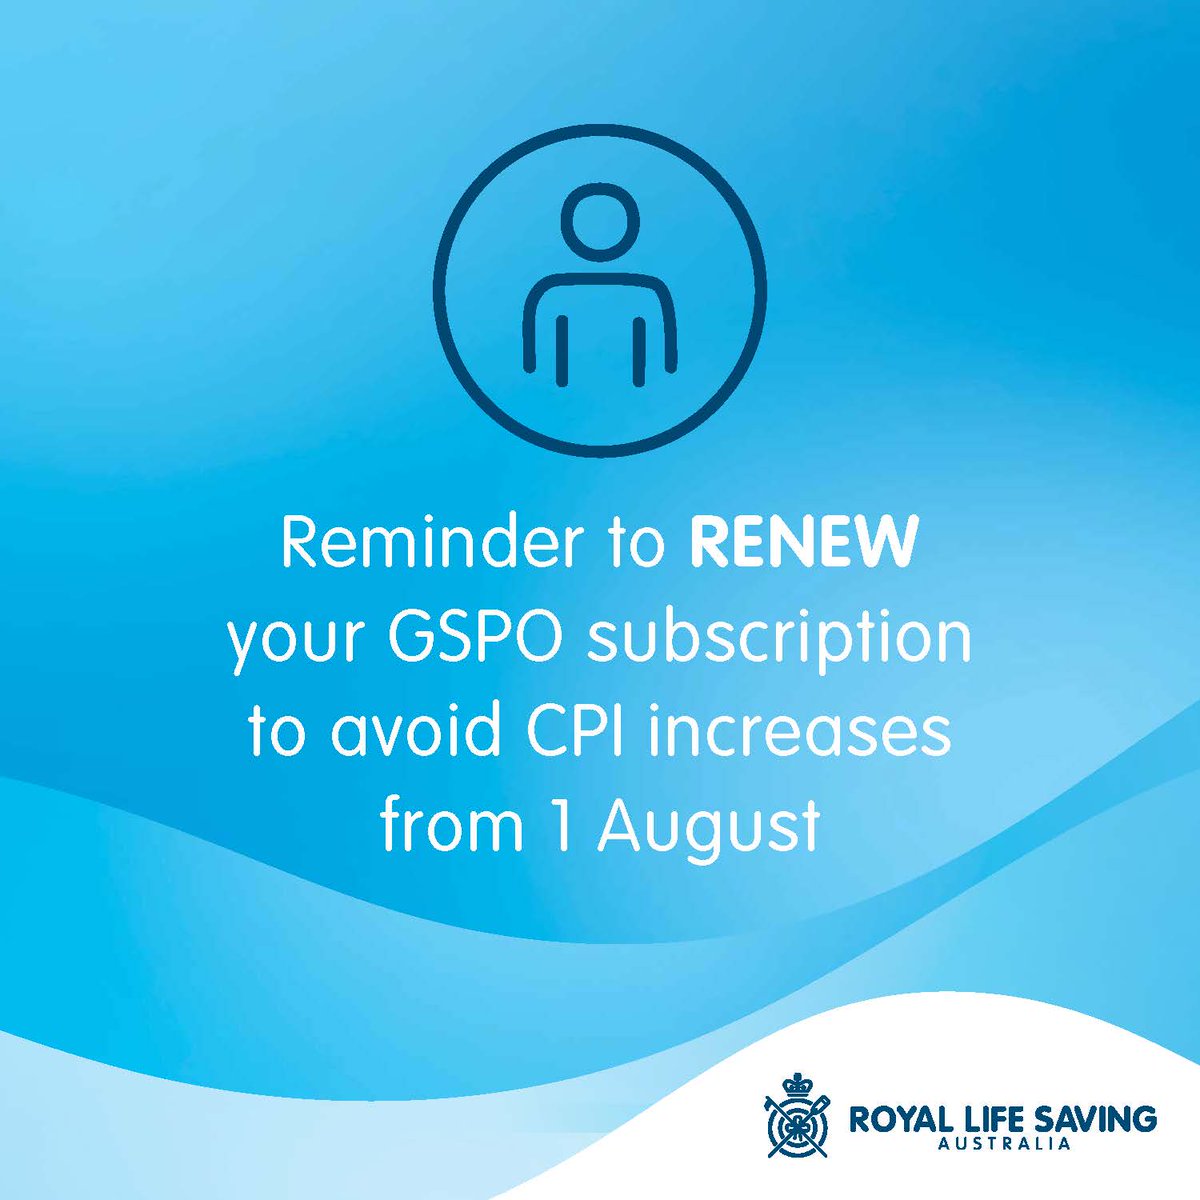 It’s that time of year again ⏰ Aquatic industry - renew your facility’s subscription to the Guidelines for Safe Pool Operations in July to avoid a CPI price increase in August: bit.ly/3I2He5D #GSPO #PoolSafety